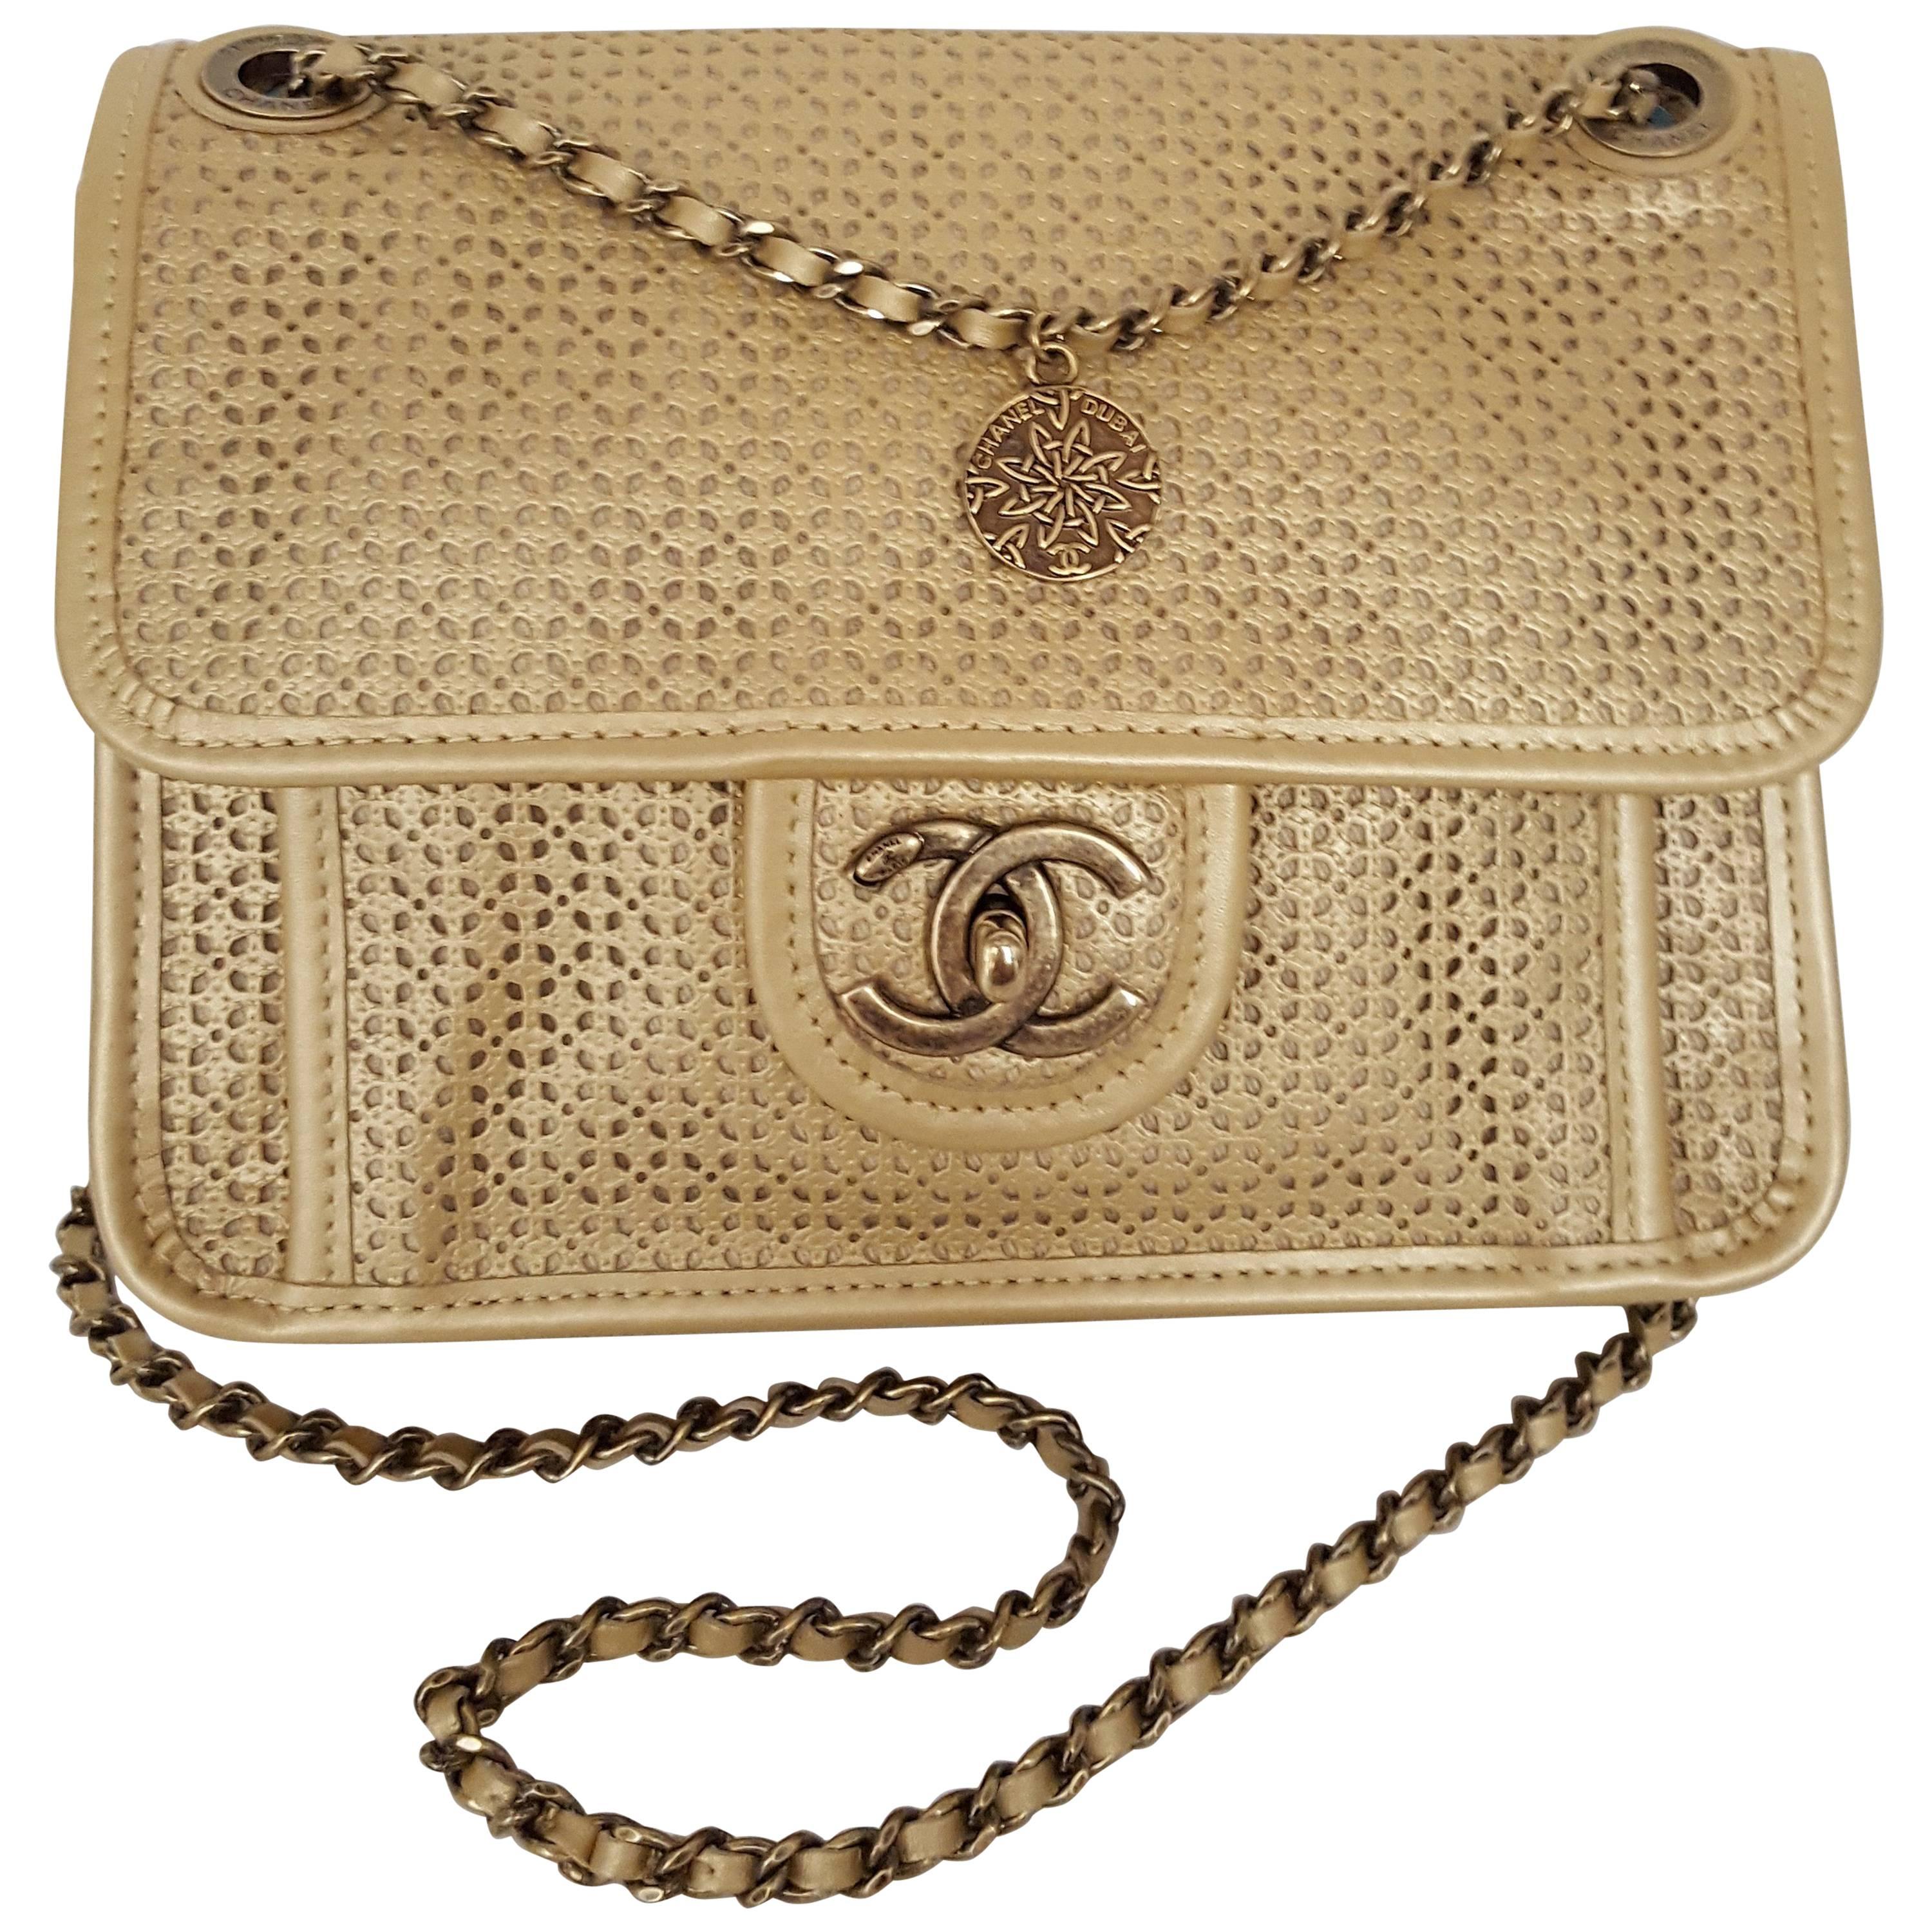 Chanel Rare Shoulder Flap Bag In Metallic Beige From the Dubai Collection